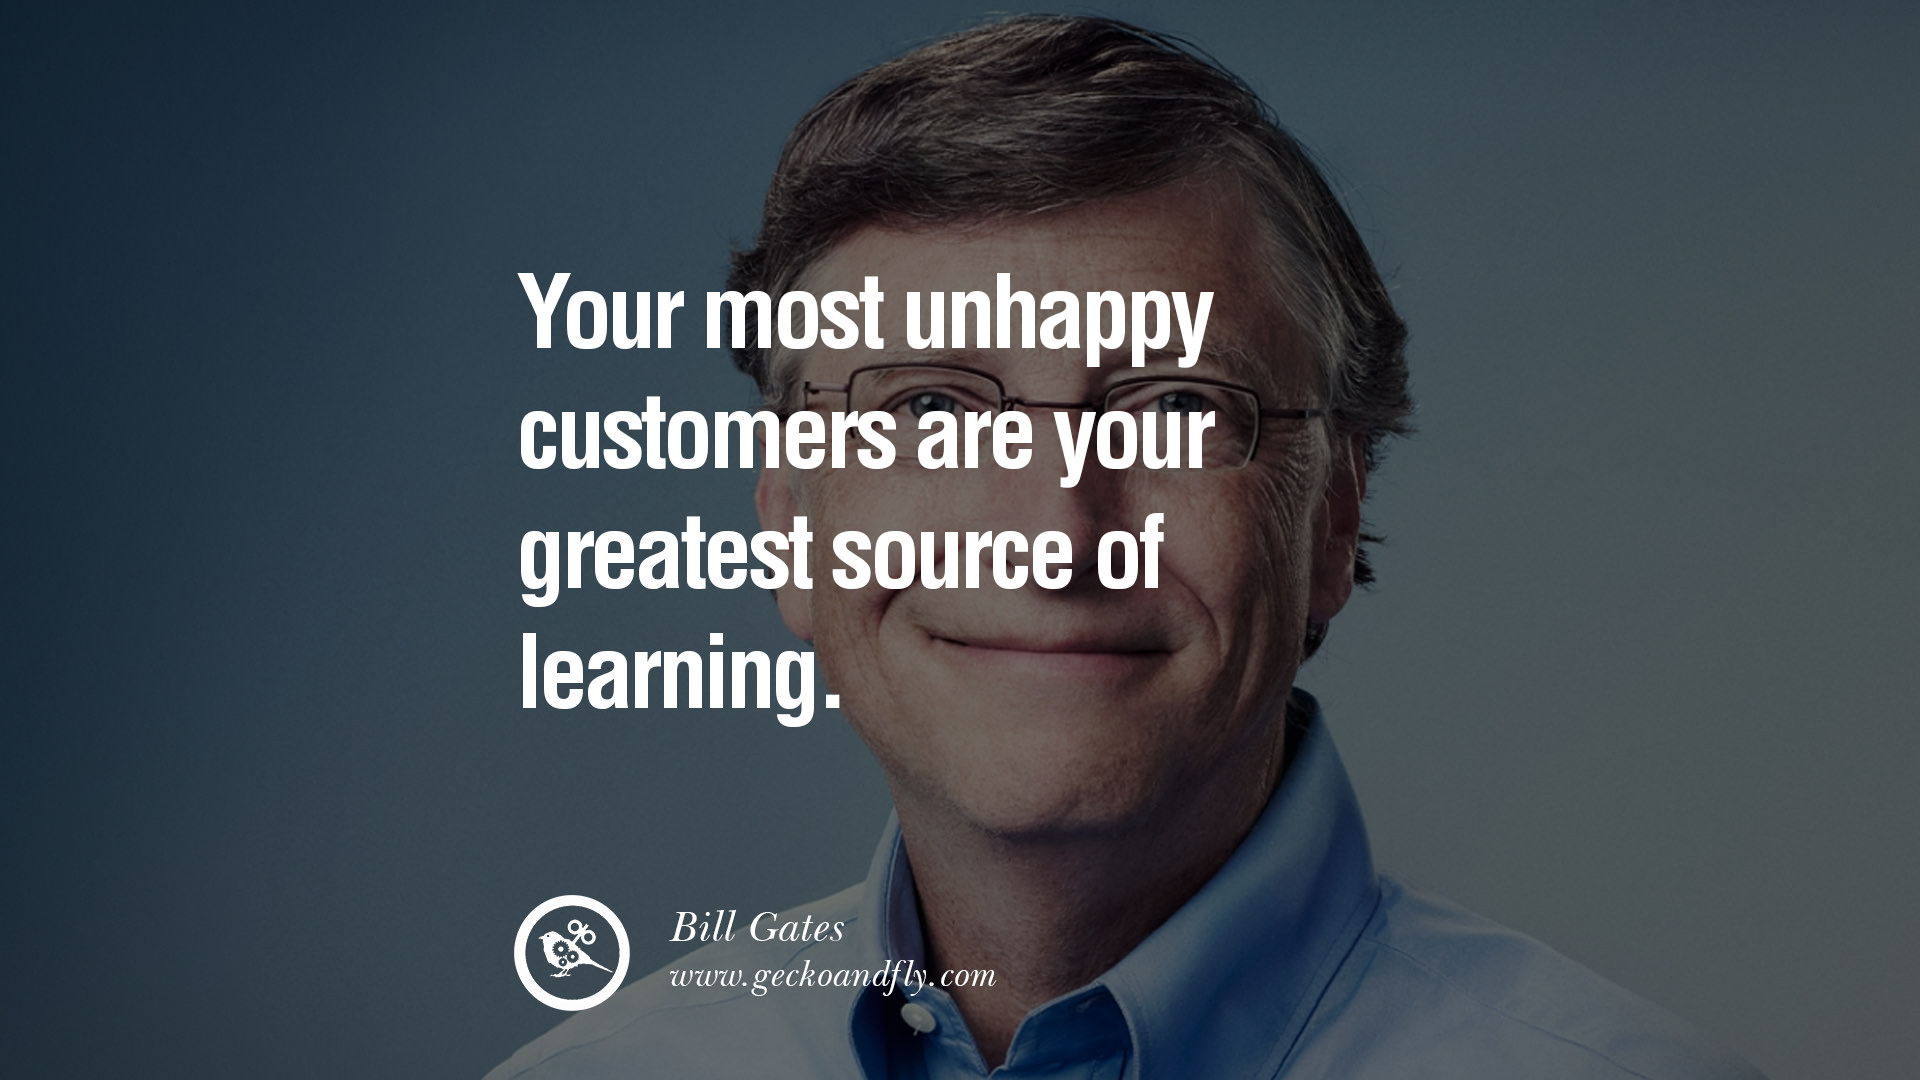 Bill Gates Quotes Your Most Unhappy Customers Are Your Greatest Source